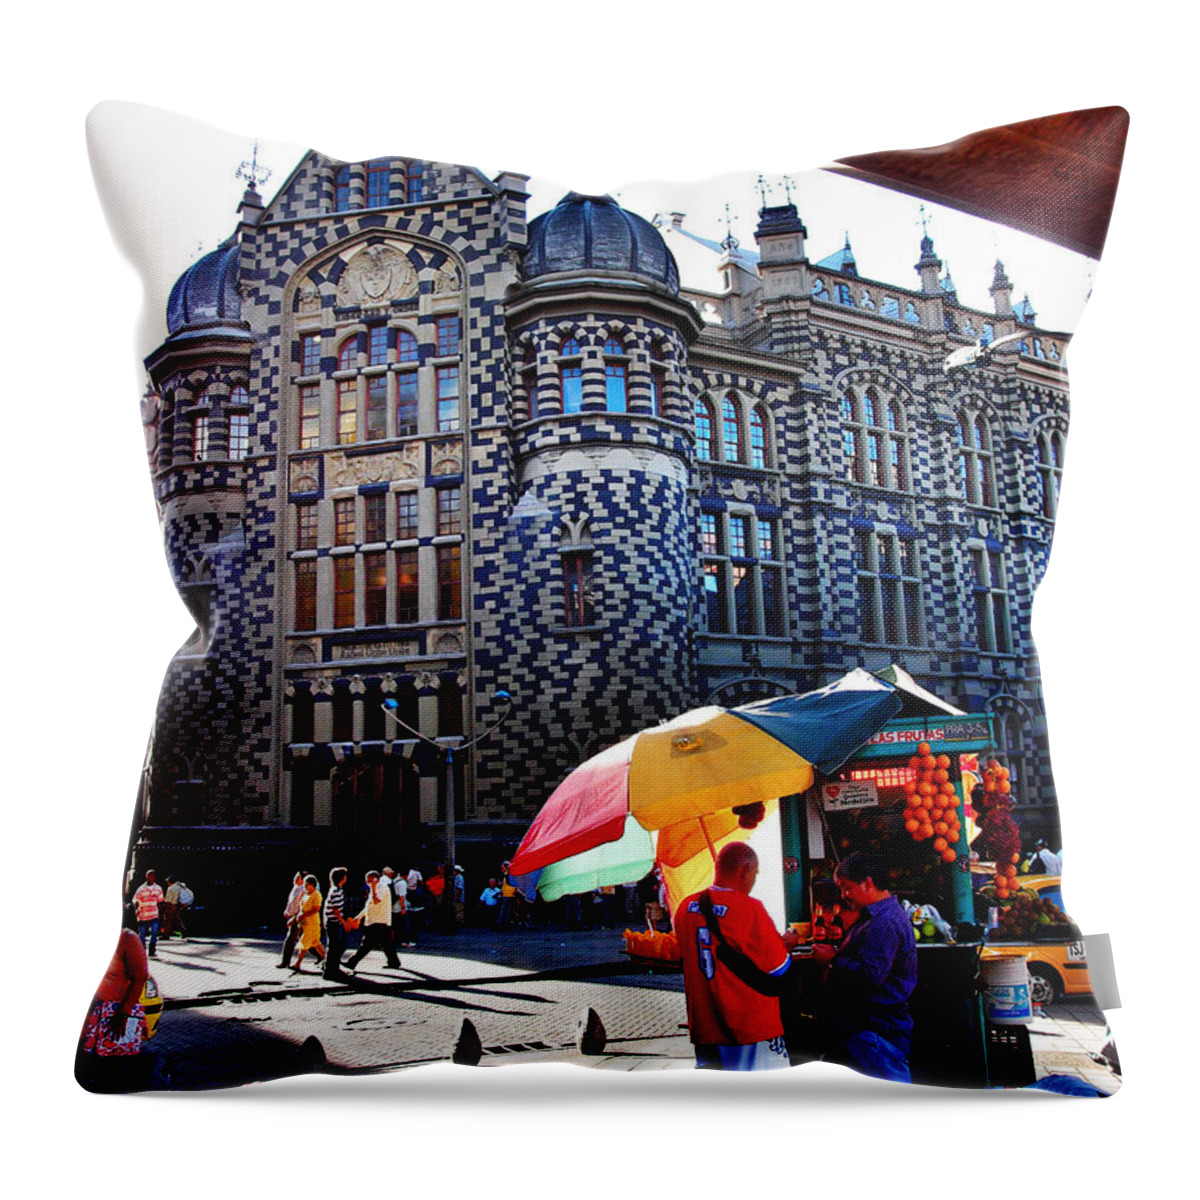 Iglesia Dulce Throw Pillow featuring the photograph Inglesia Dulce by Skip Hunt